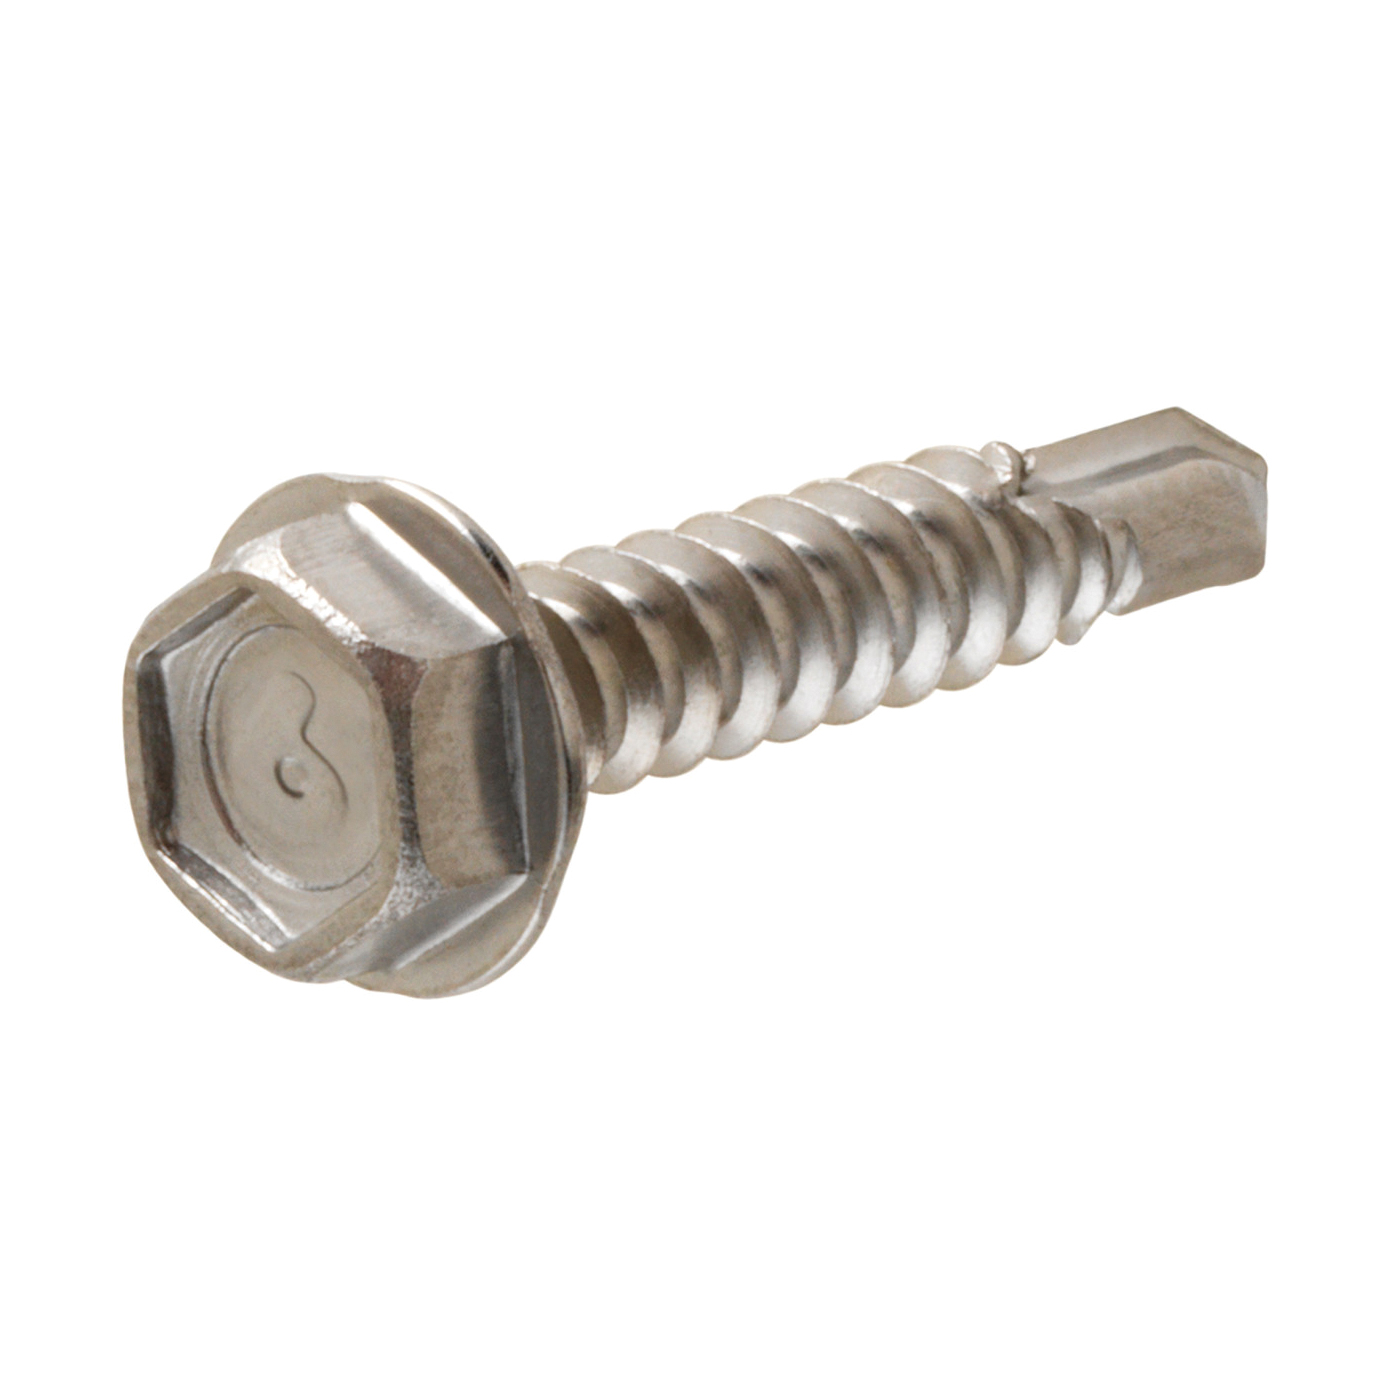 881836 Screw, #10 Thread, 1/2 in L, Coarse Thread, Washer Head, Hex Drive, Self-Drilling Point, Stainless Steel